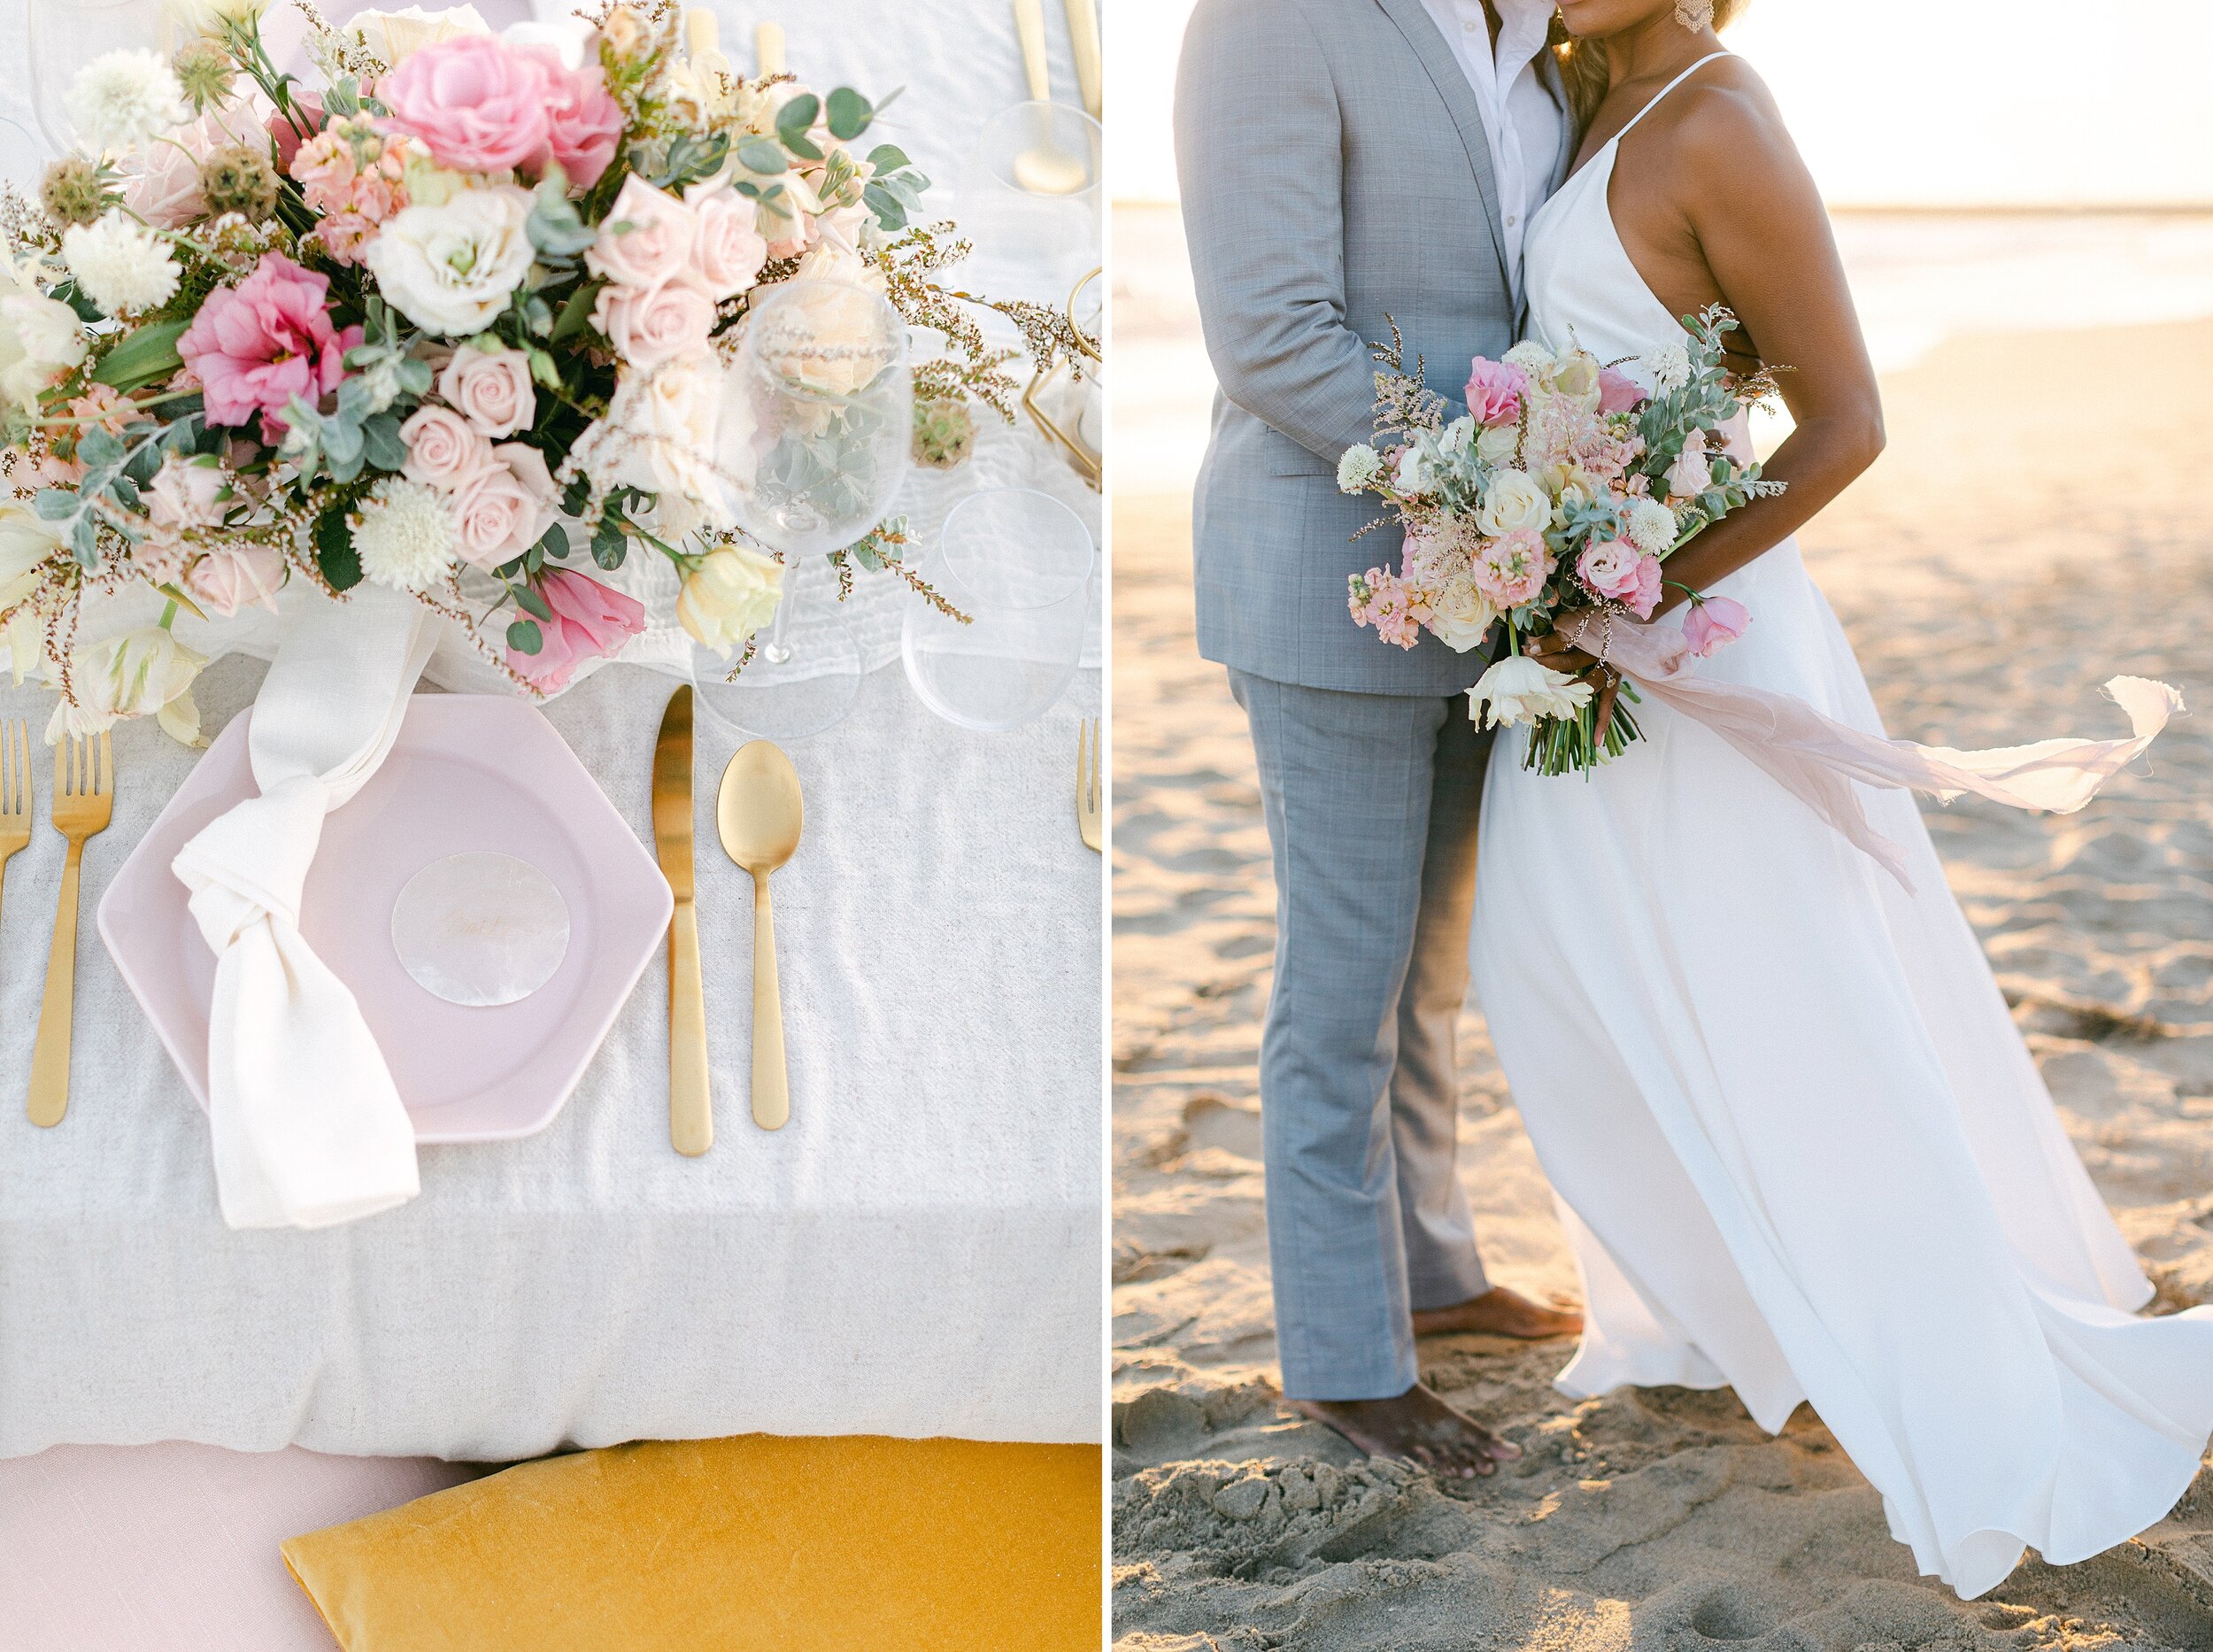 Bride and groom pose for golden hour wedding photos on the beach following their intimate Springtime elopement.